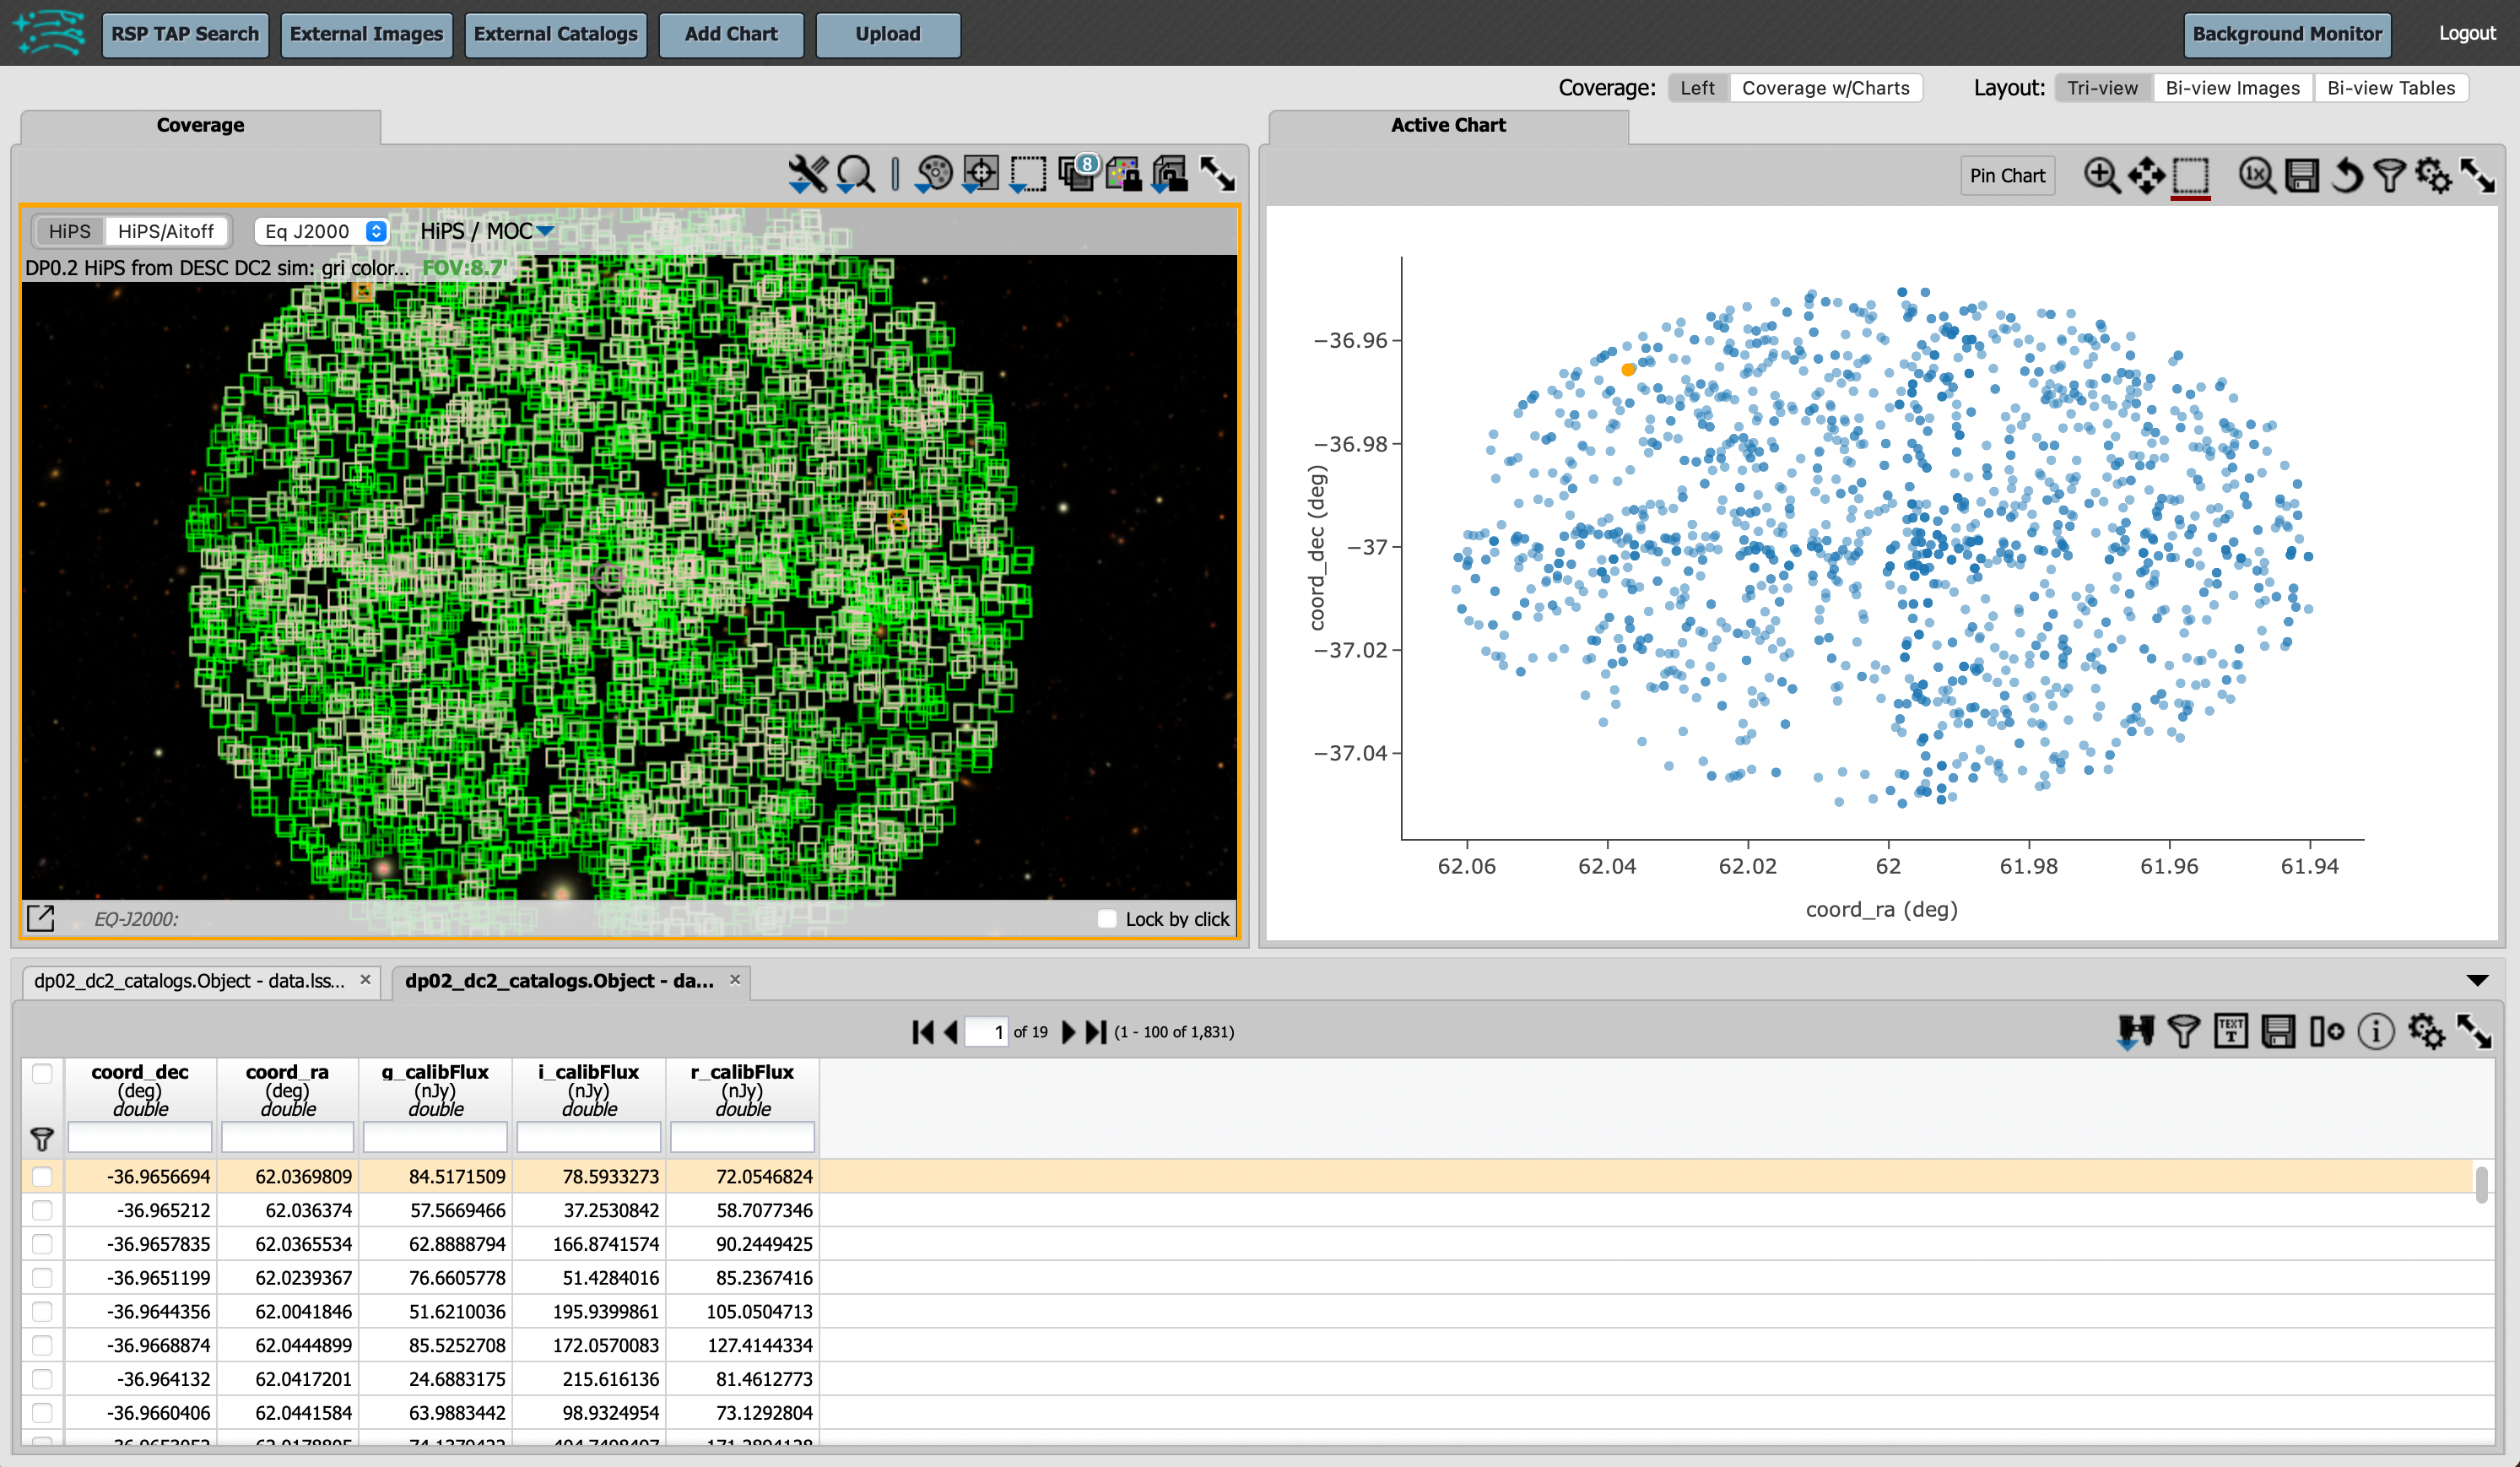 Rubin science platform portal search results are displayed in this image.  The left top panel shows an image of the sky.  The right to panel has a scatter plot of objects and the bottom panel shows the data table from the search.